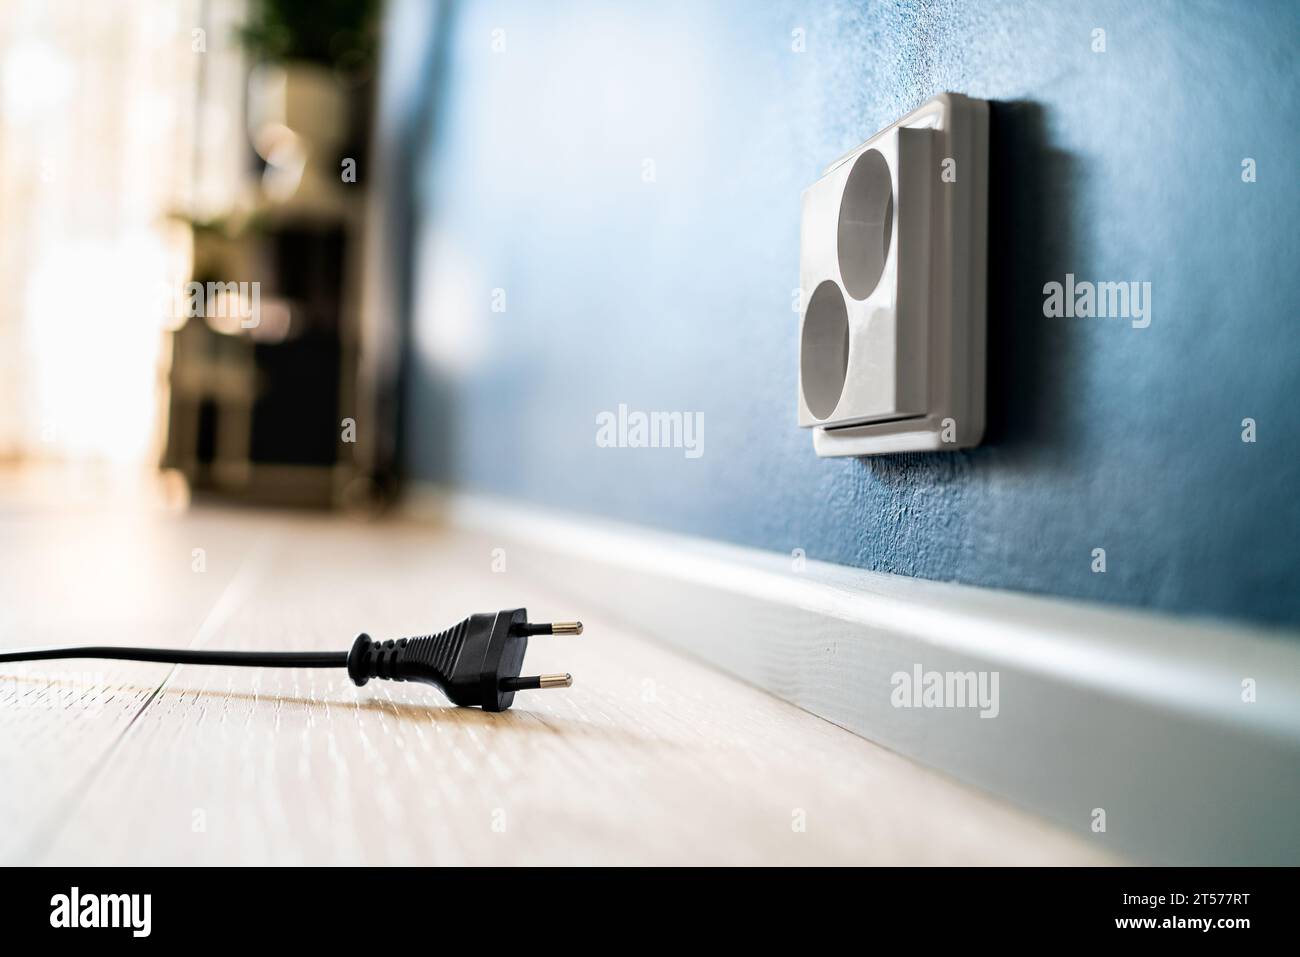 Socket and power outlet. Electric plug. Cable unplugged from wall. Wire and cord. Electricity off. Energy consumption, crisis or saving. Stock Photo